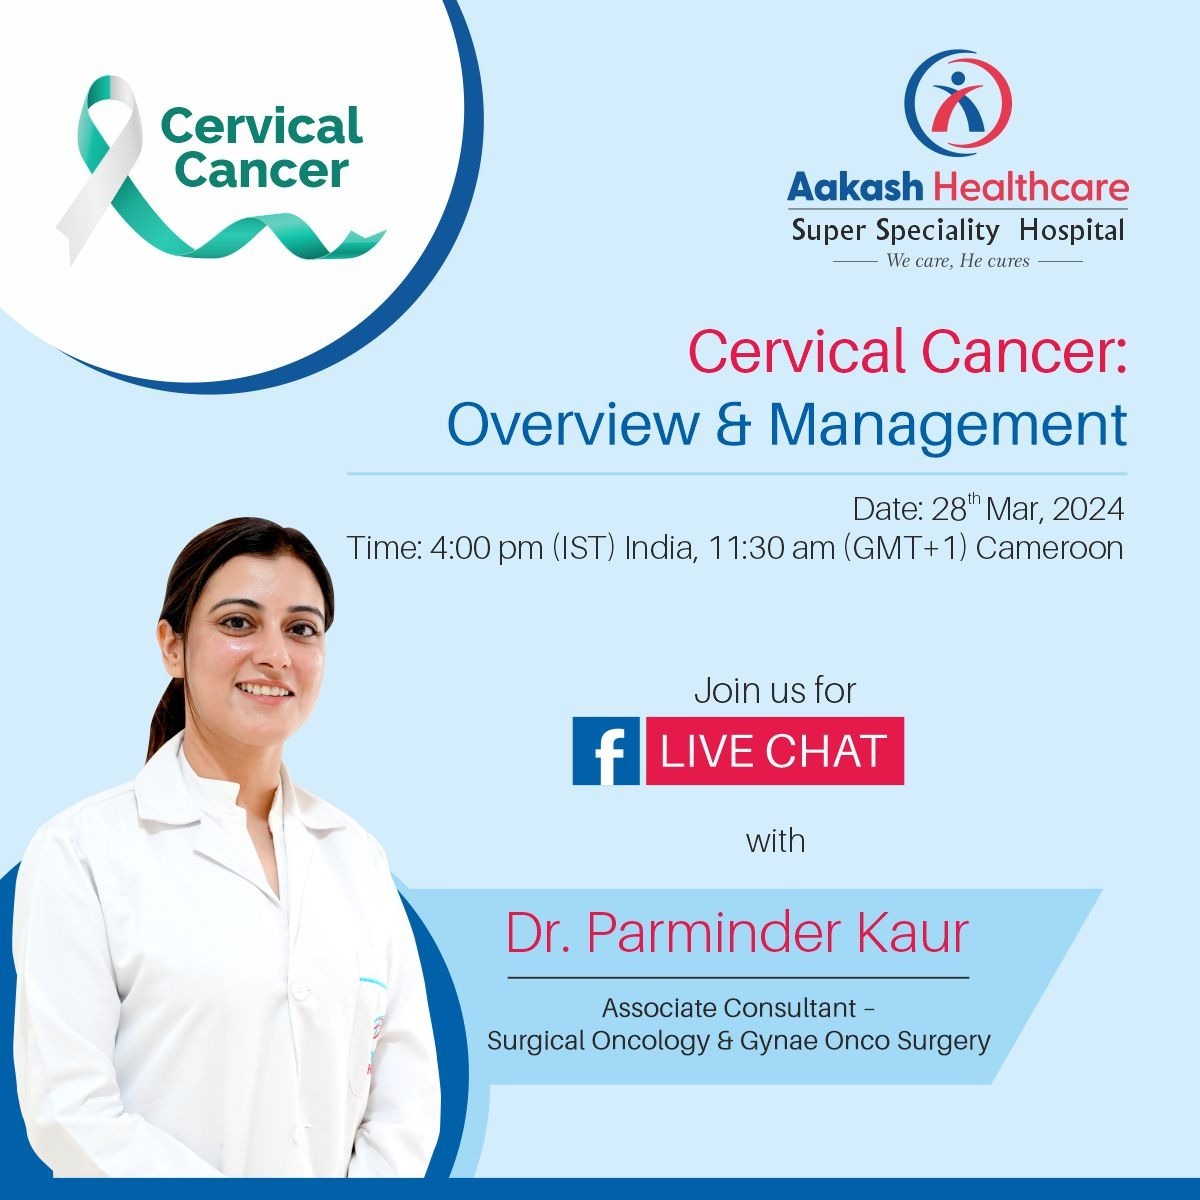 Join a Facebook LIVE chat session on “𝑪𝒆𝒓𝒗𝒊𝒄𝒂𝒍 𝑪𝒂𝒏𝒄𝒆𝒓: 𝐎𝐯𝐞𝐫𝐯𝐢𝐞𝐰 & 𝐌𝐚𝐧𝐚𝐠𝐞𝐦𝐞𝐧𝐭” By Dr. Parminder Kaur, Associate Consultant, Surgical Oncology, Aakash Healthcare.